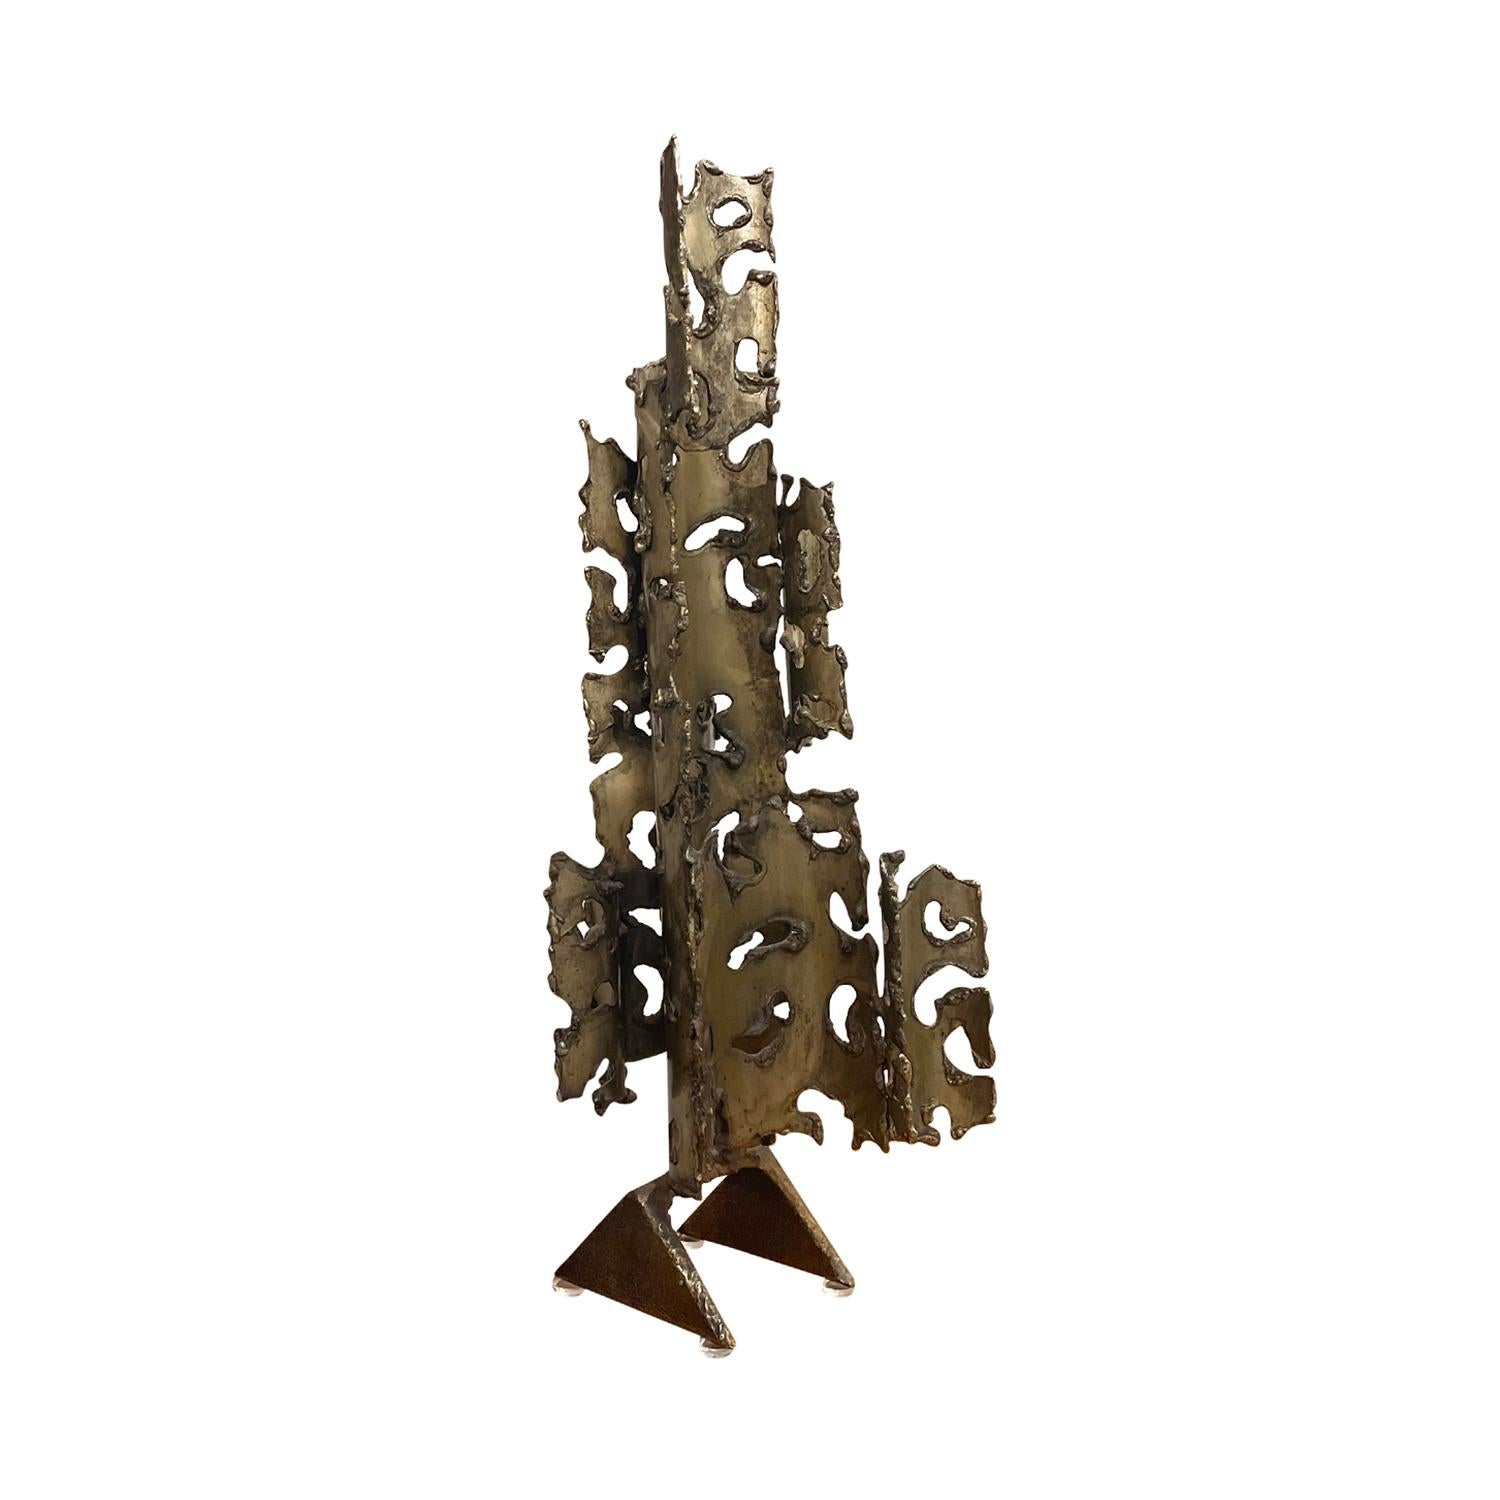 Hand-Crafted 20th Century Italian Brutalist Metal Sculpture - Vintage Abstract Décor Piece For Sale